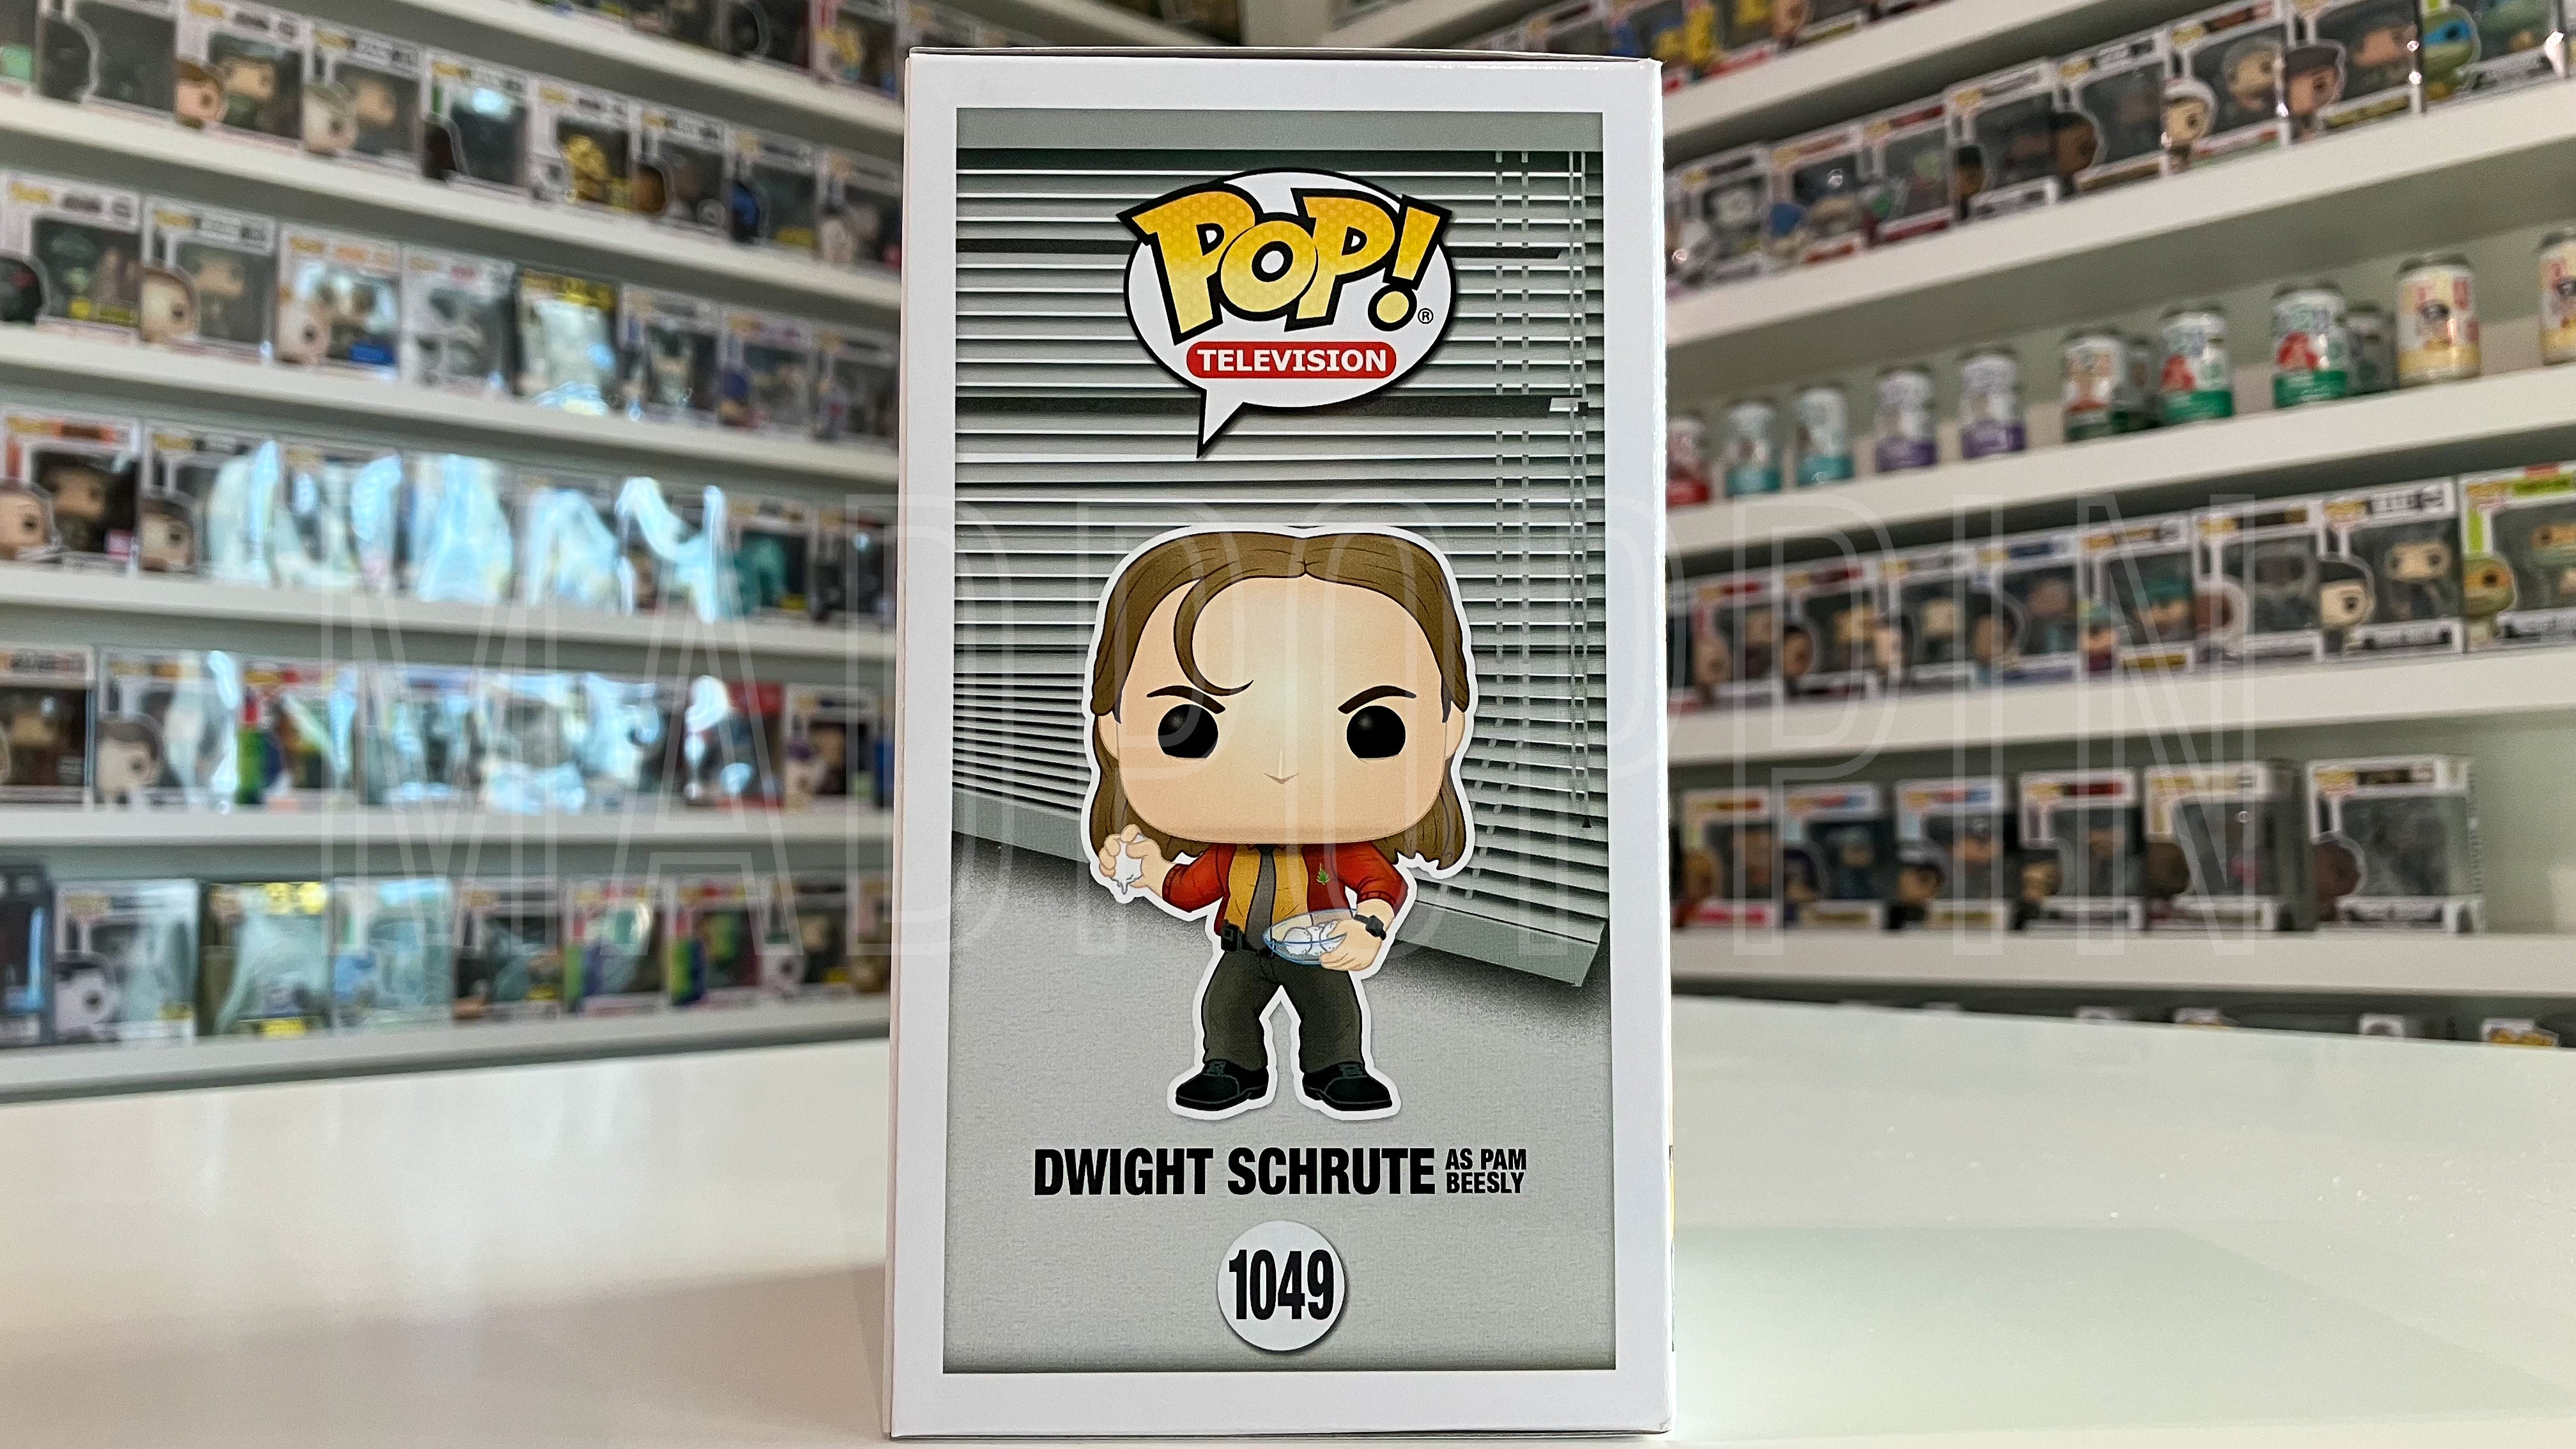 Funko Pop Tv The Office Dwight Schrute As Pam Beesly Funko-shop.com 1049